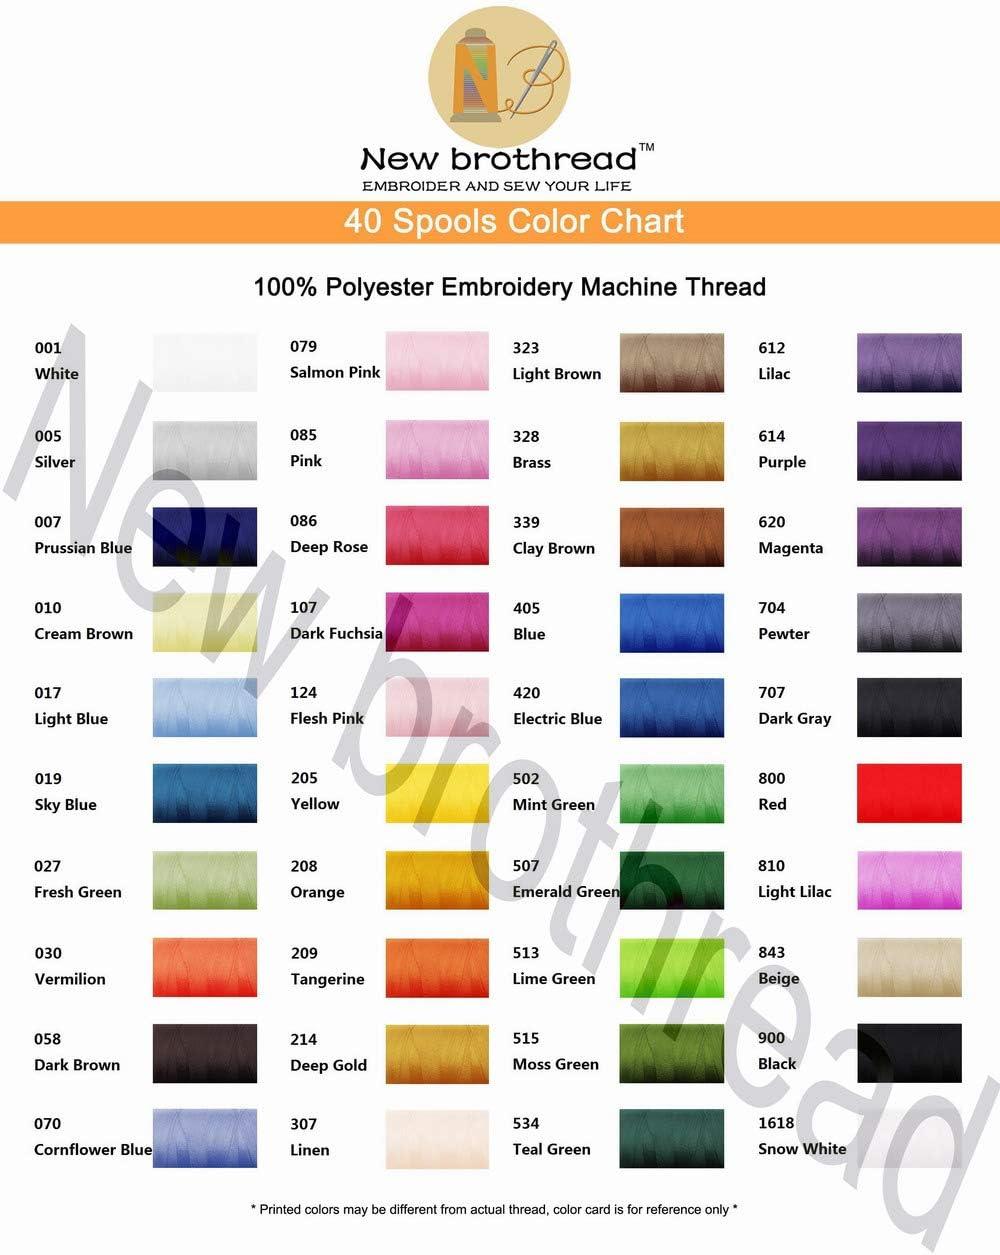 New brothread 8 Colors Luminary Glow in The Dark Embroidery Machine Thread  Kit 30WT 500M(550Y)